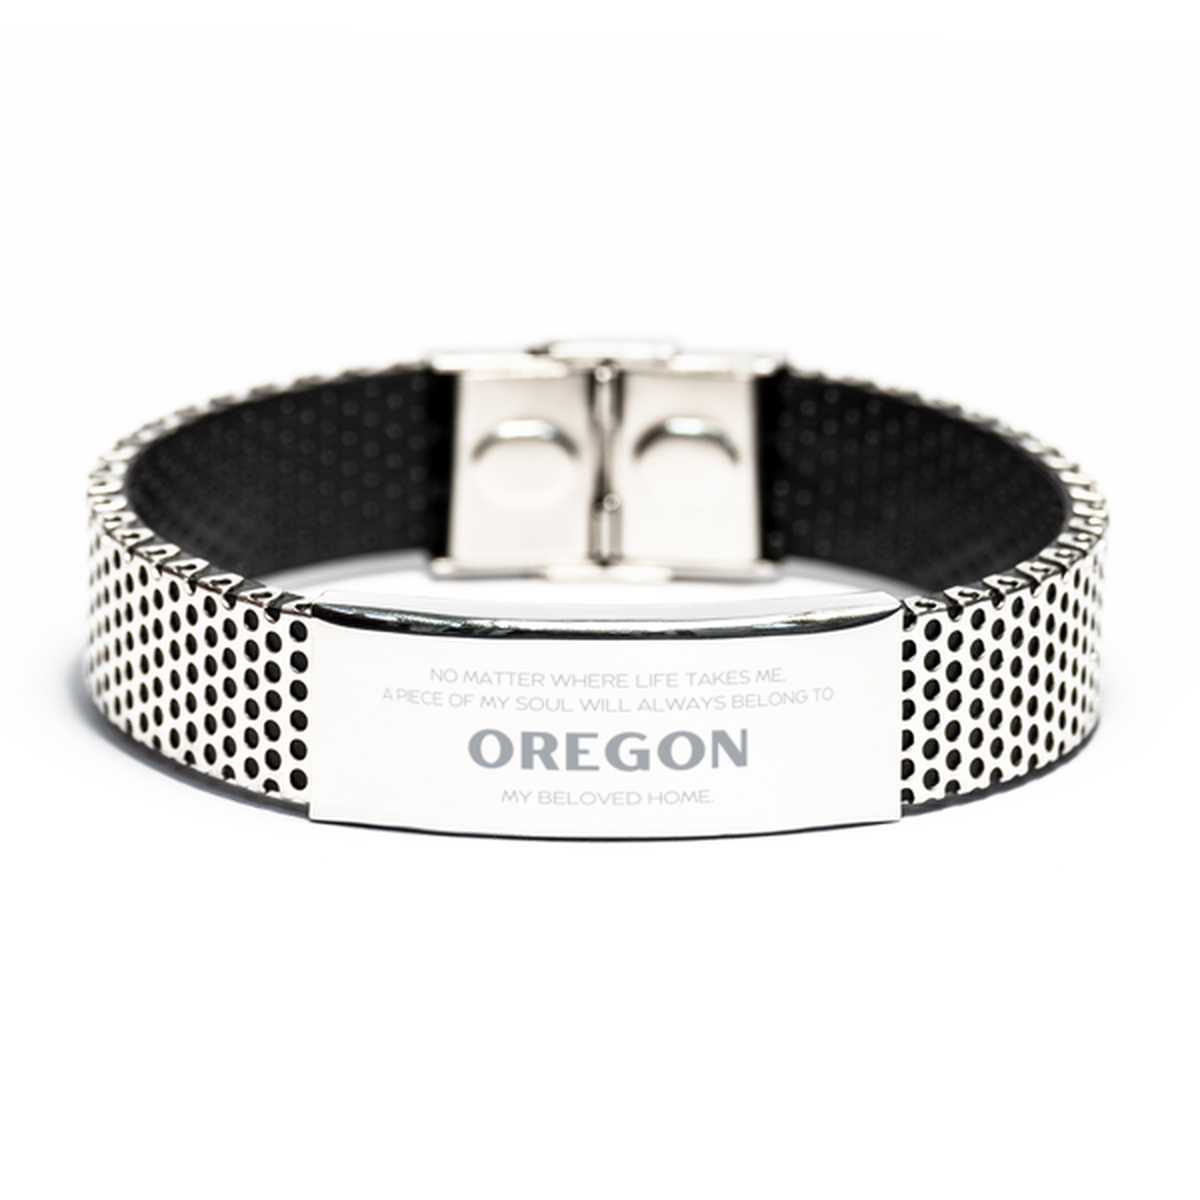 Love Oregon State Gifts, My soul will always belong to Oregon, Proud Stainless Steel Bracelet, Birthday Unique Gifts For Oregon Men, Women, Friends